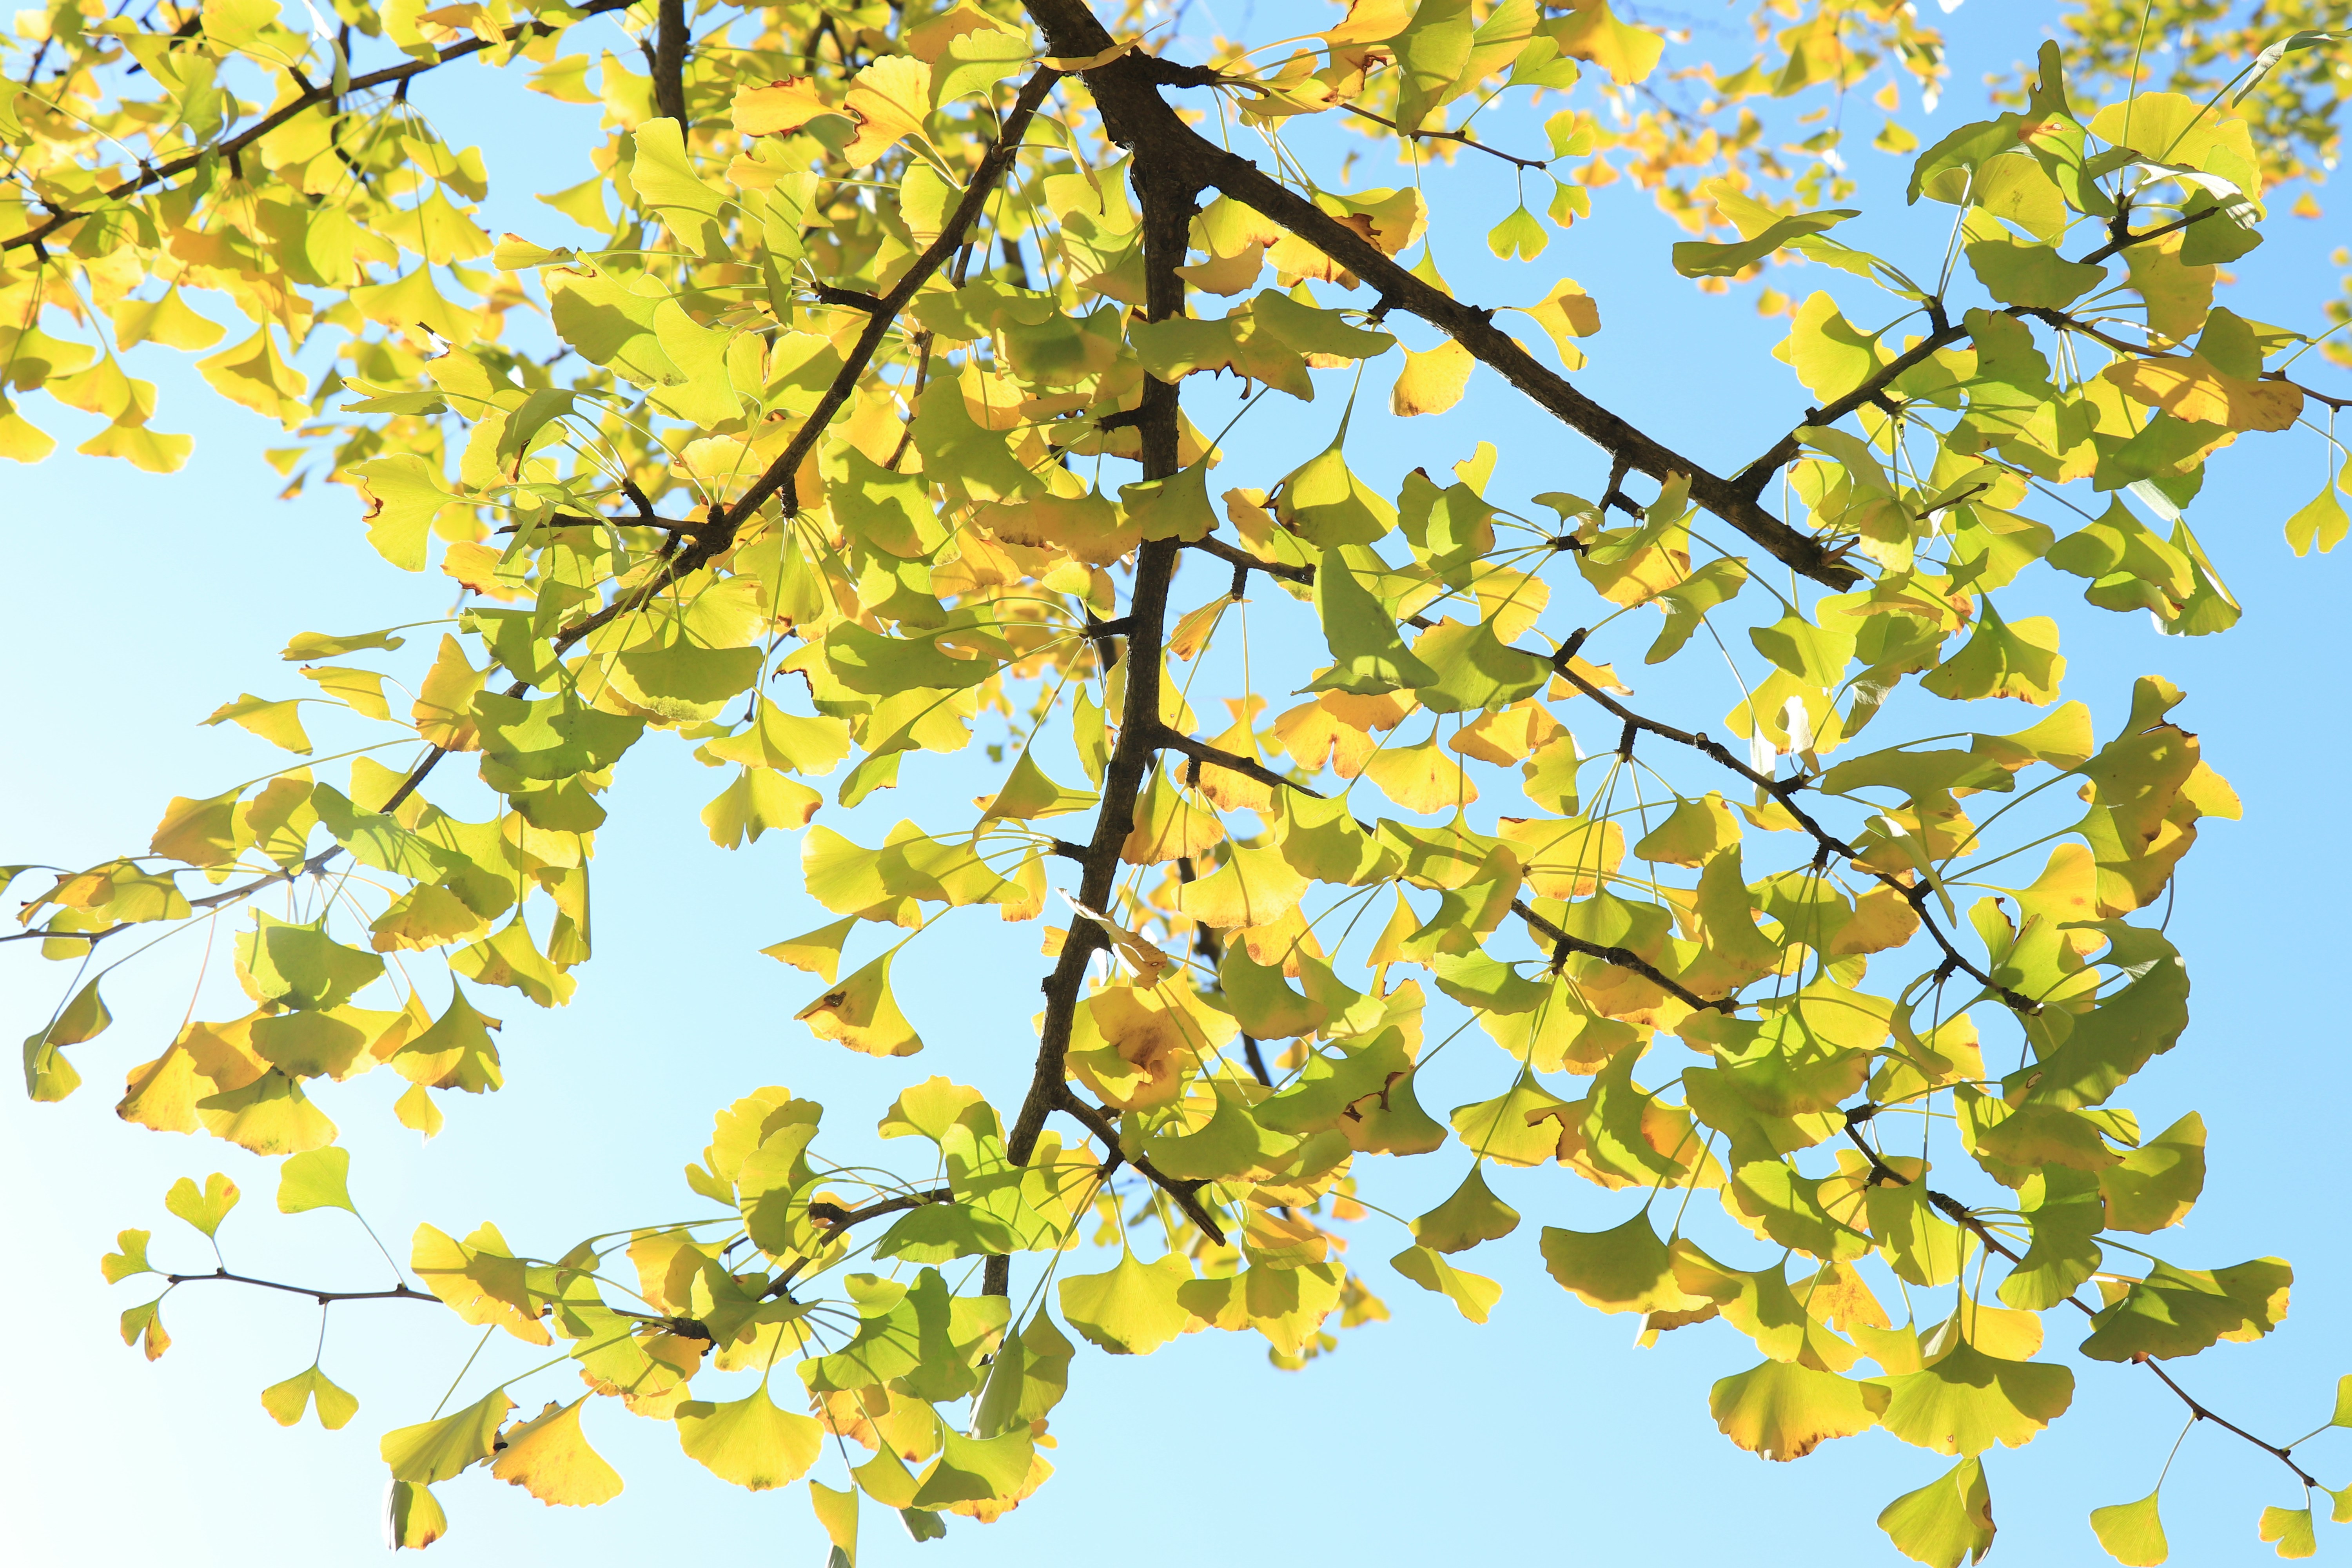 It’s autumn, and the gingko leaves are turning yellow. What a comfortable season!